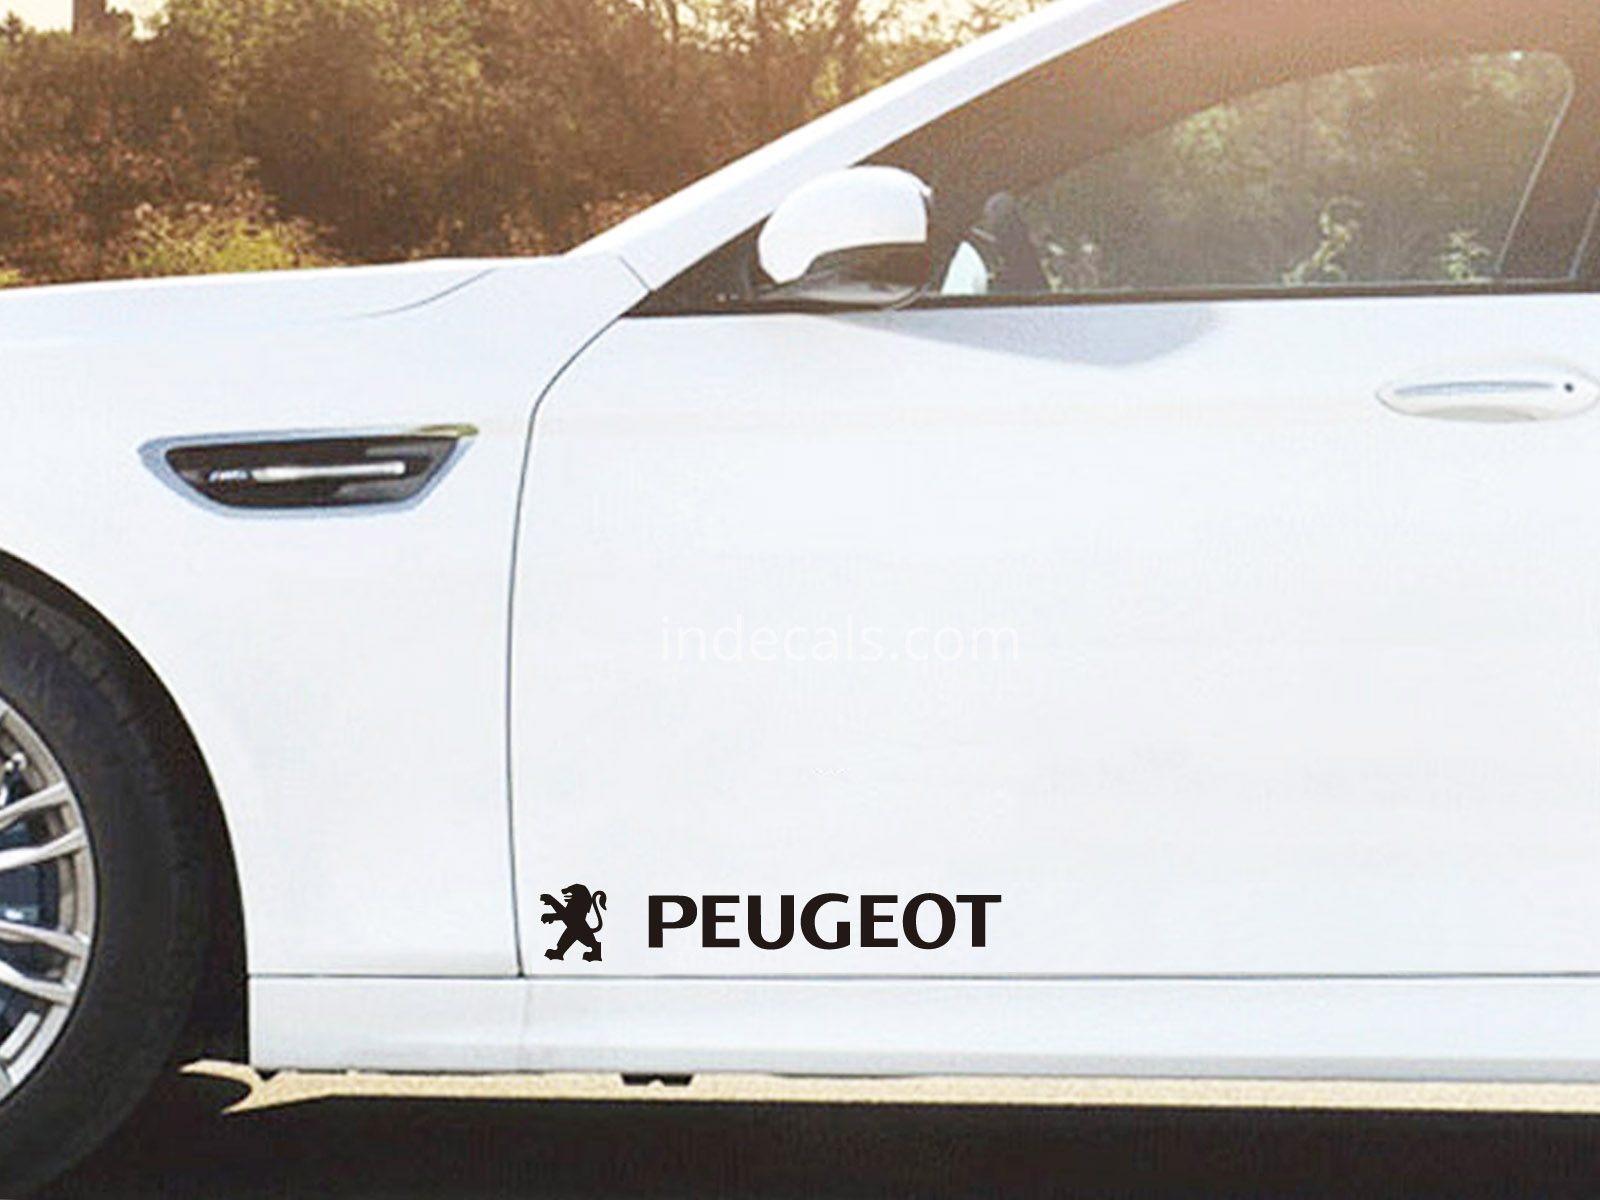 2 x Peugeot Stickers for Doors Large - Black